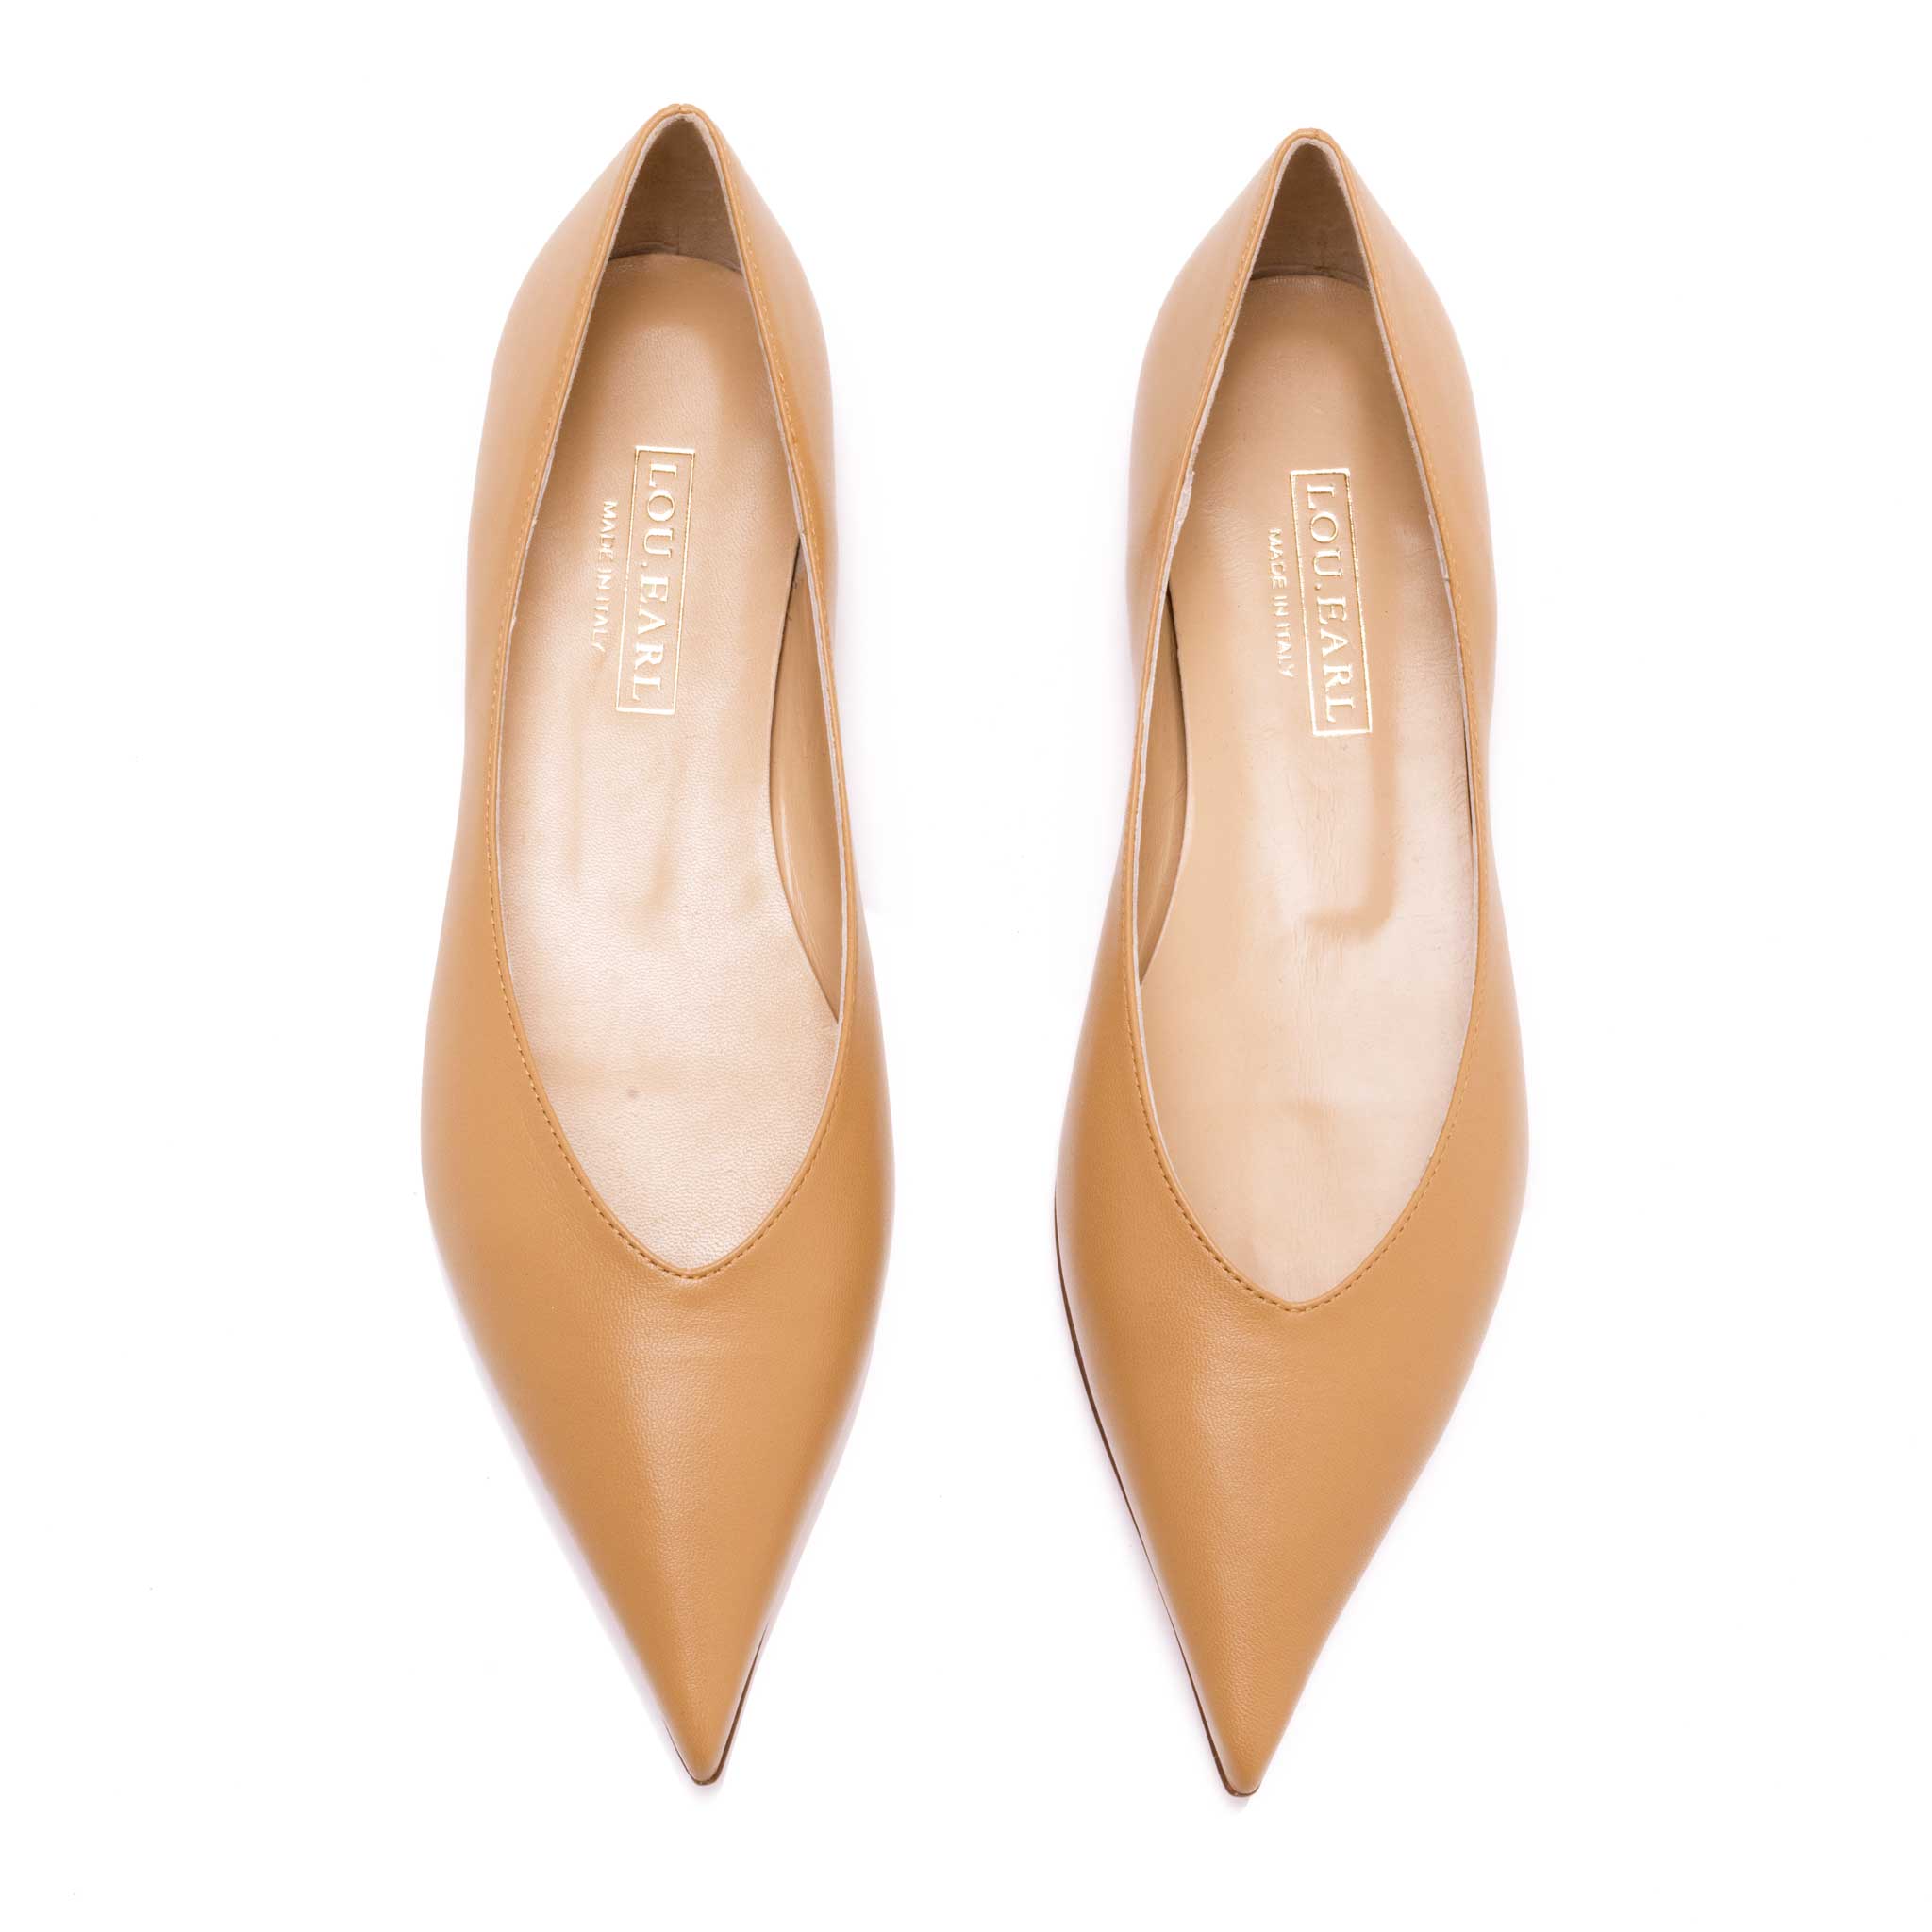 camel colored extreme pointy toe shoes slip on pointed toe leather flat shoes for women